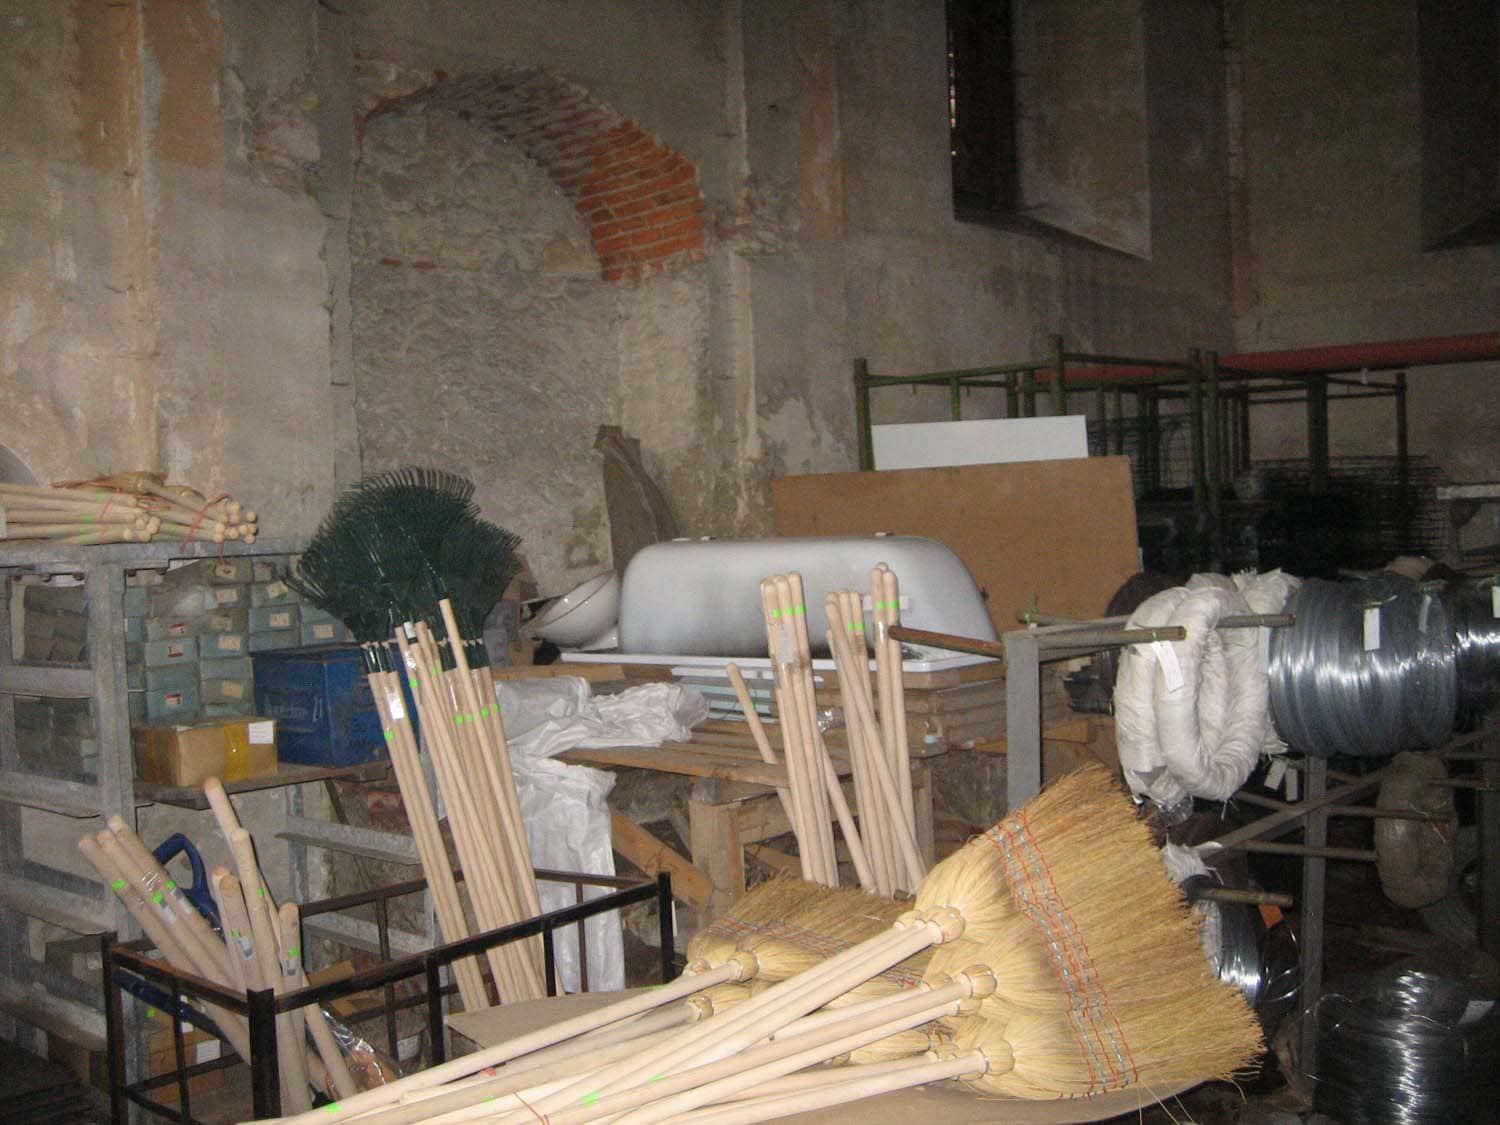 Bardejov Old Synagogue interior Eastern wall showing various building supplies occupying the space before restoration